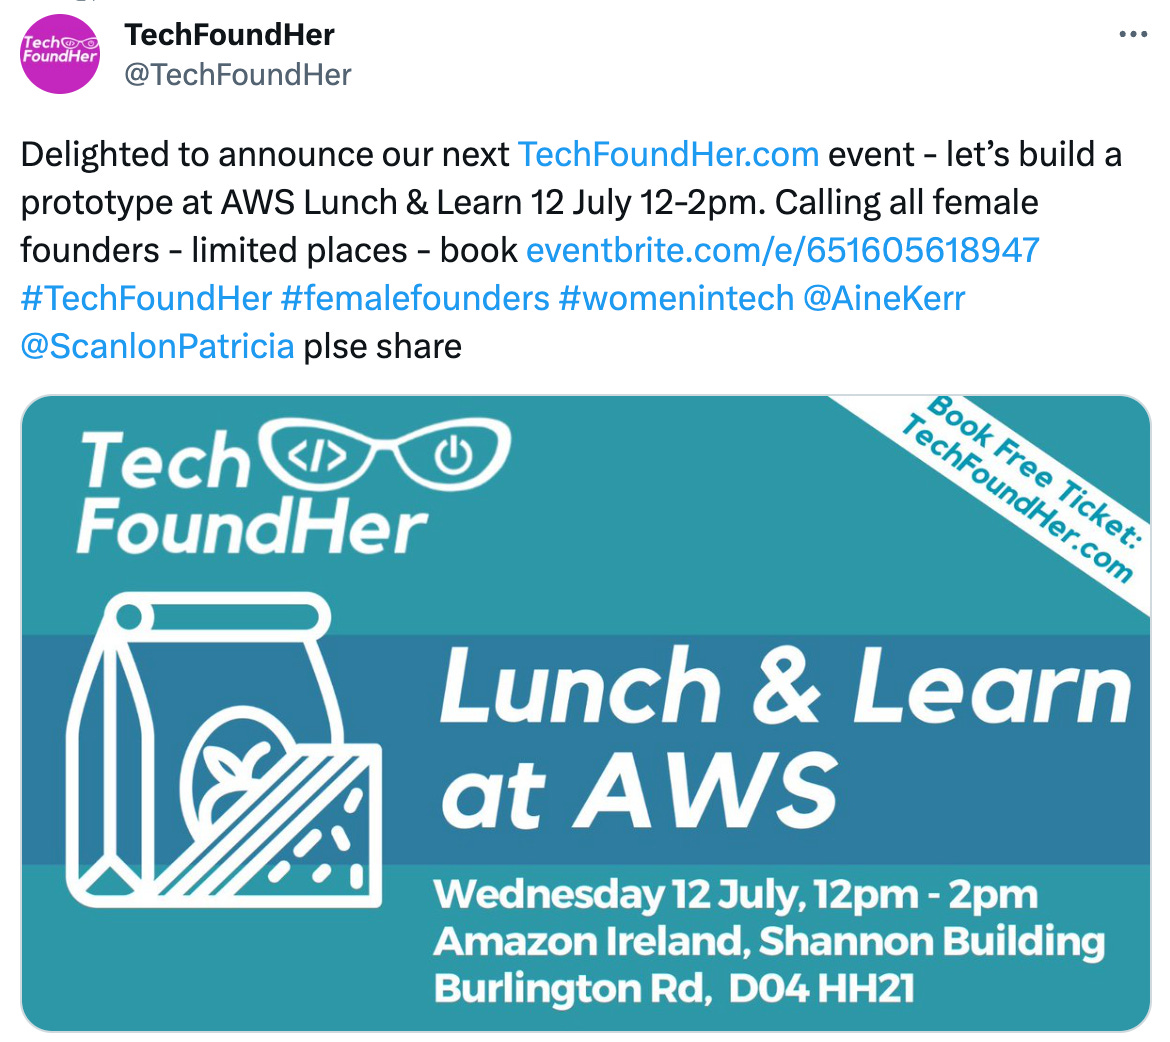 Tweet about the next TechFoundHer event, Lunch and Learn at AWS.